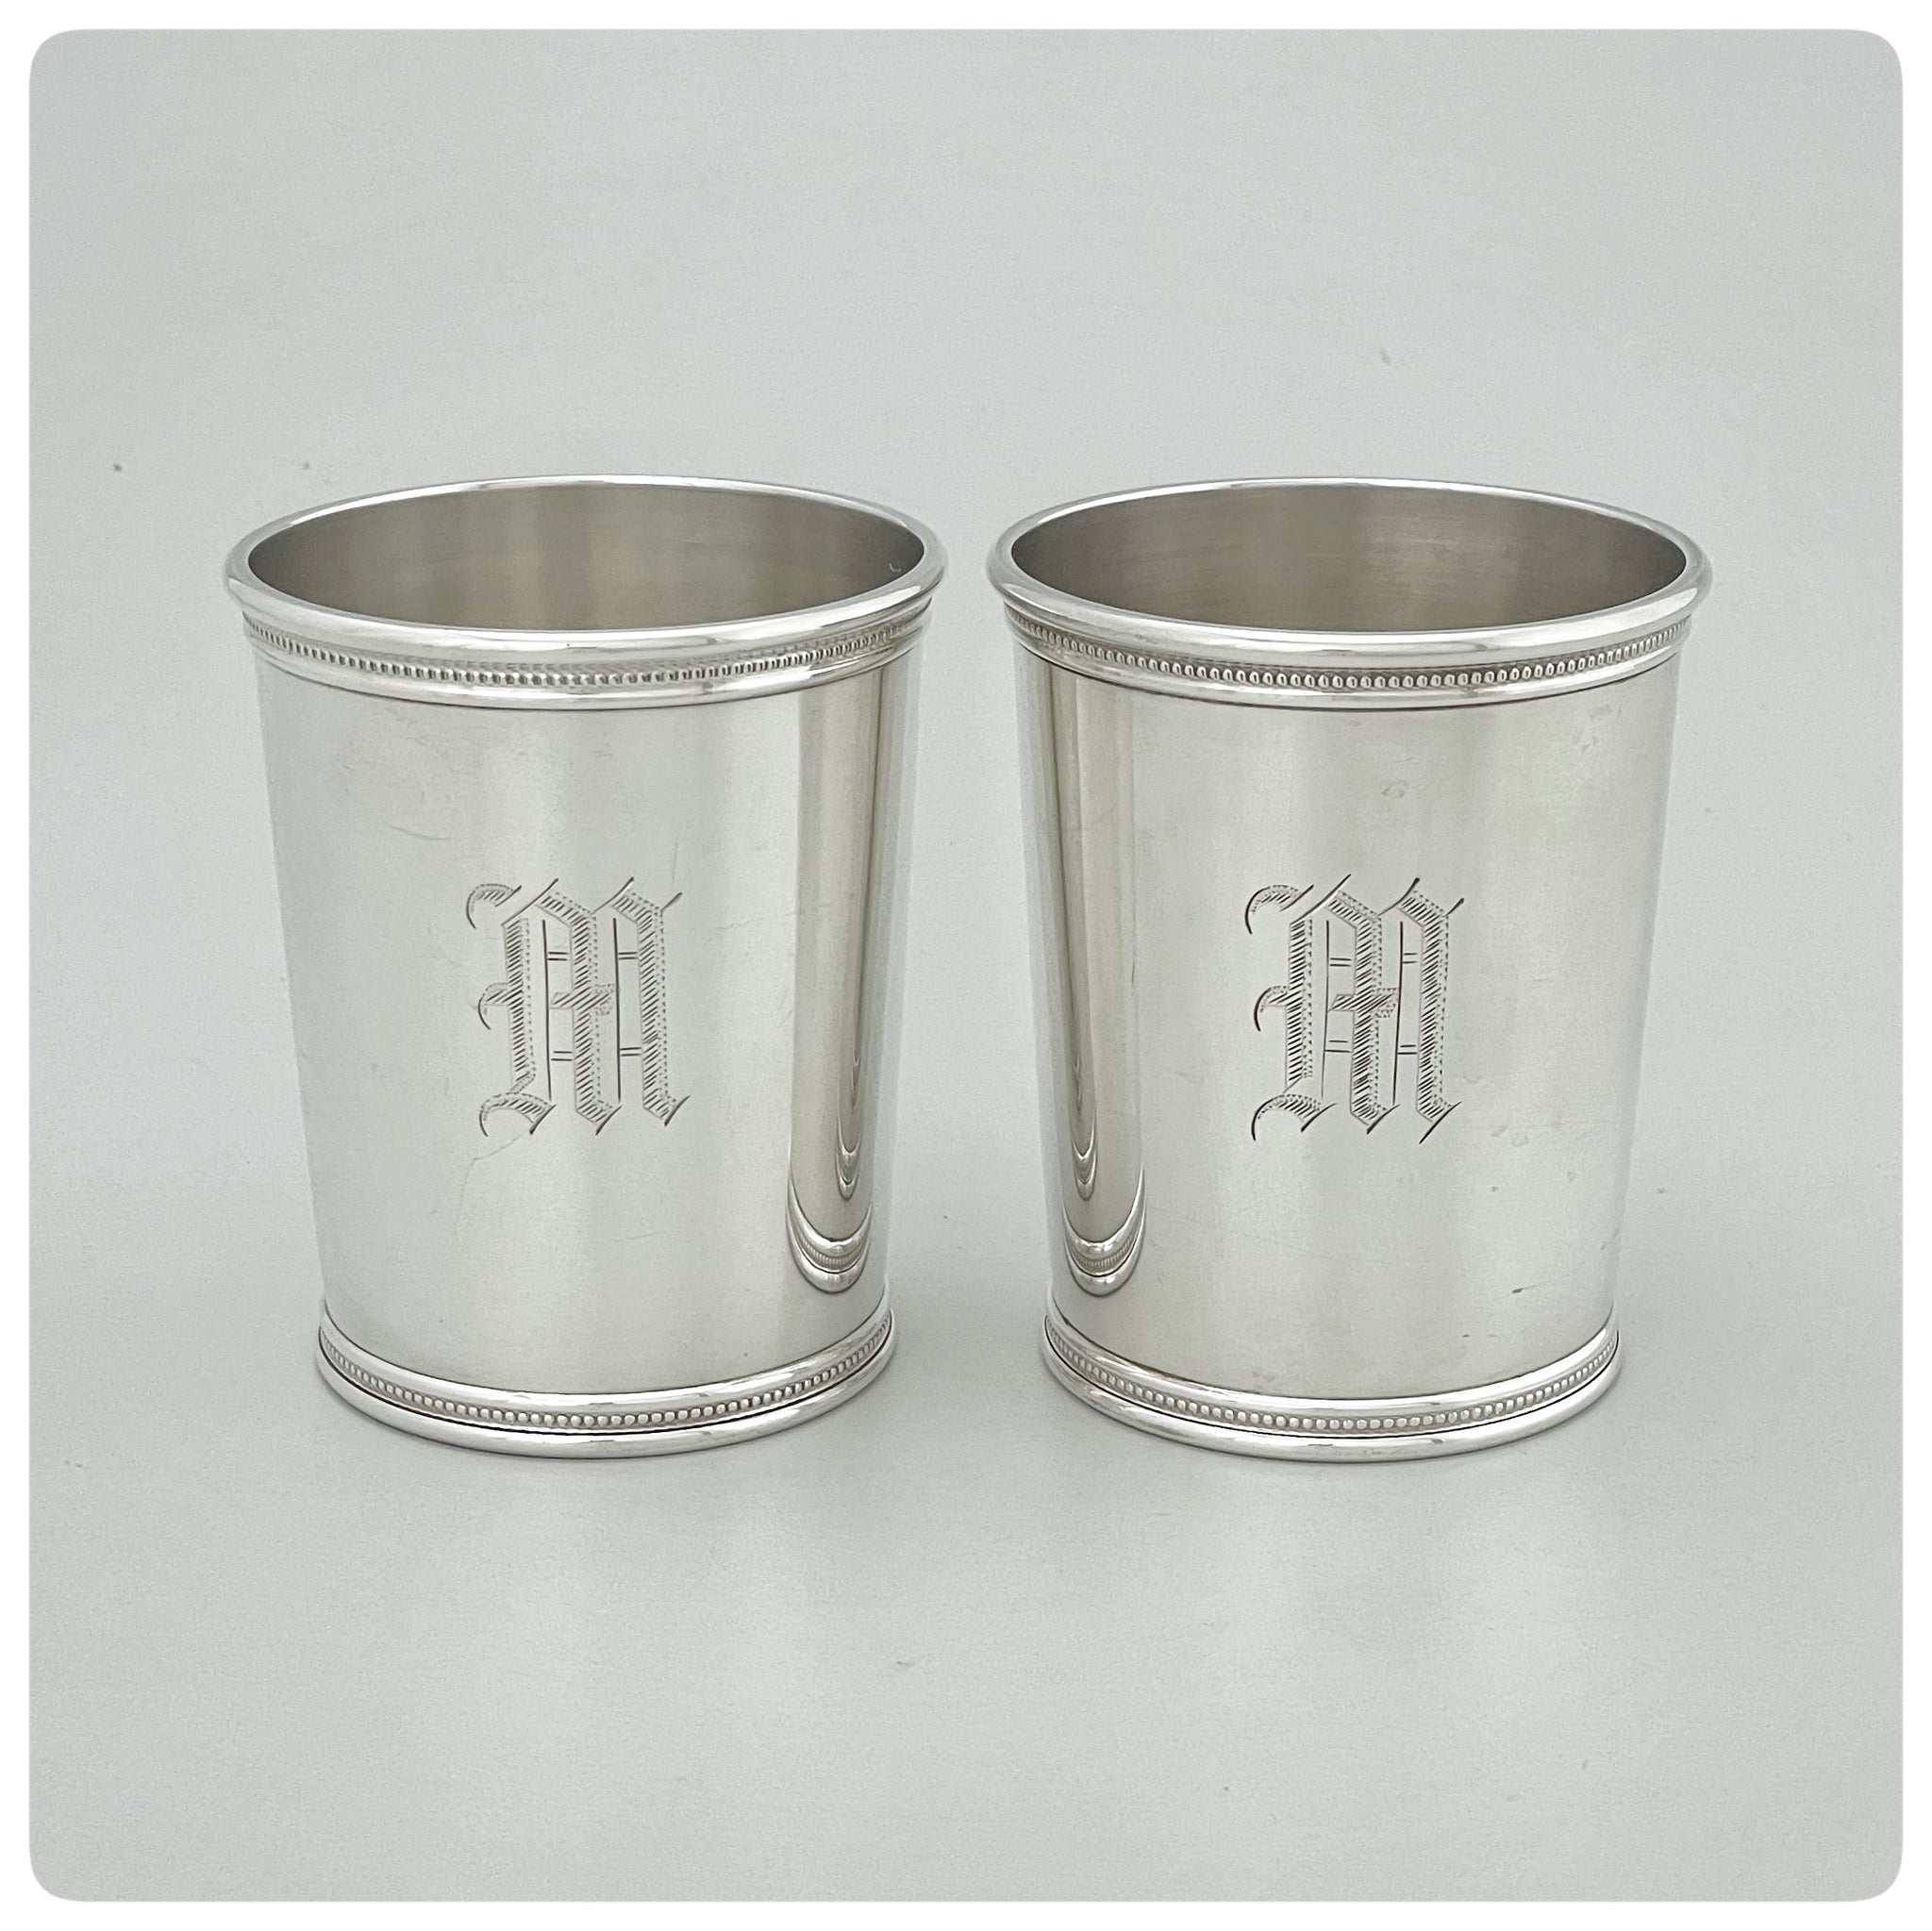 Pair of Sterling Silver Mint Julep Cups in the "Presidential Series", Mark J. Scearce, Shelbyville, KY, 1967-1971 - The Silver Vault of Charleston